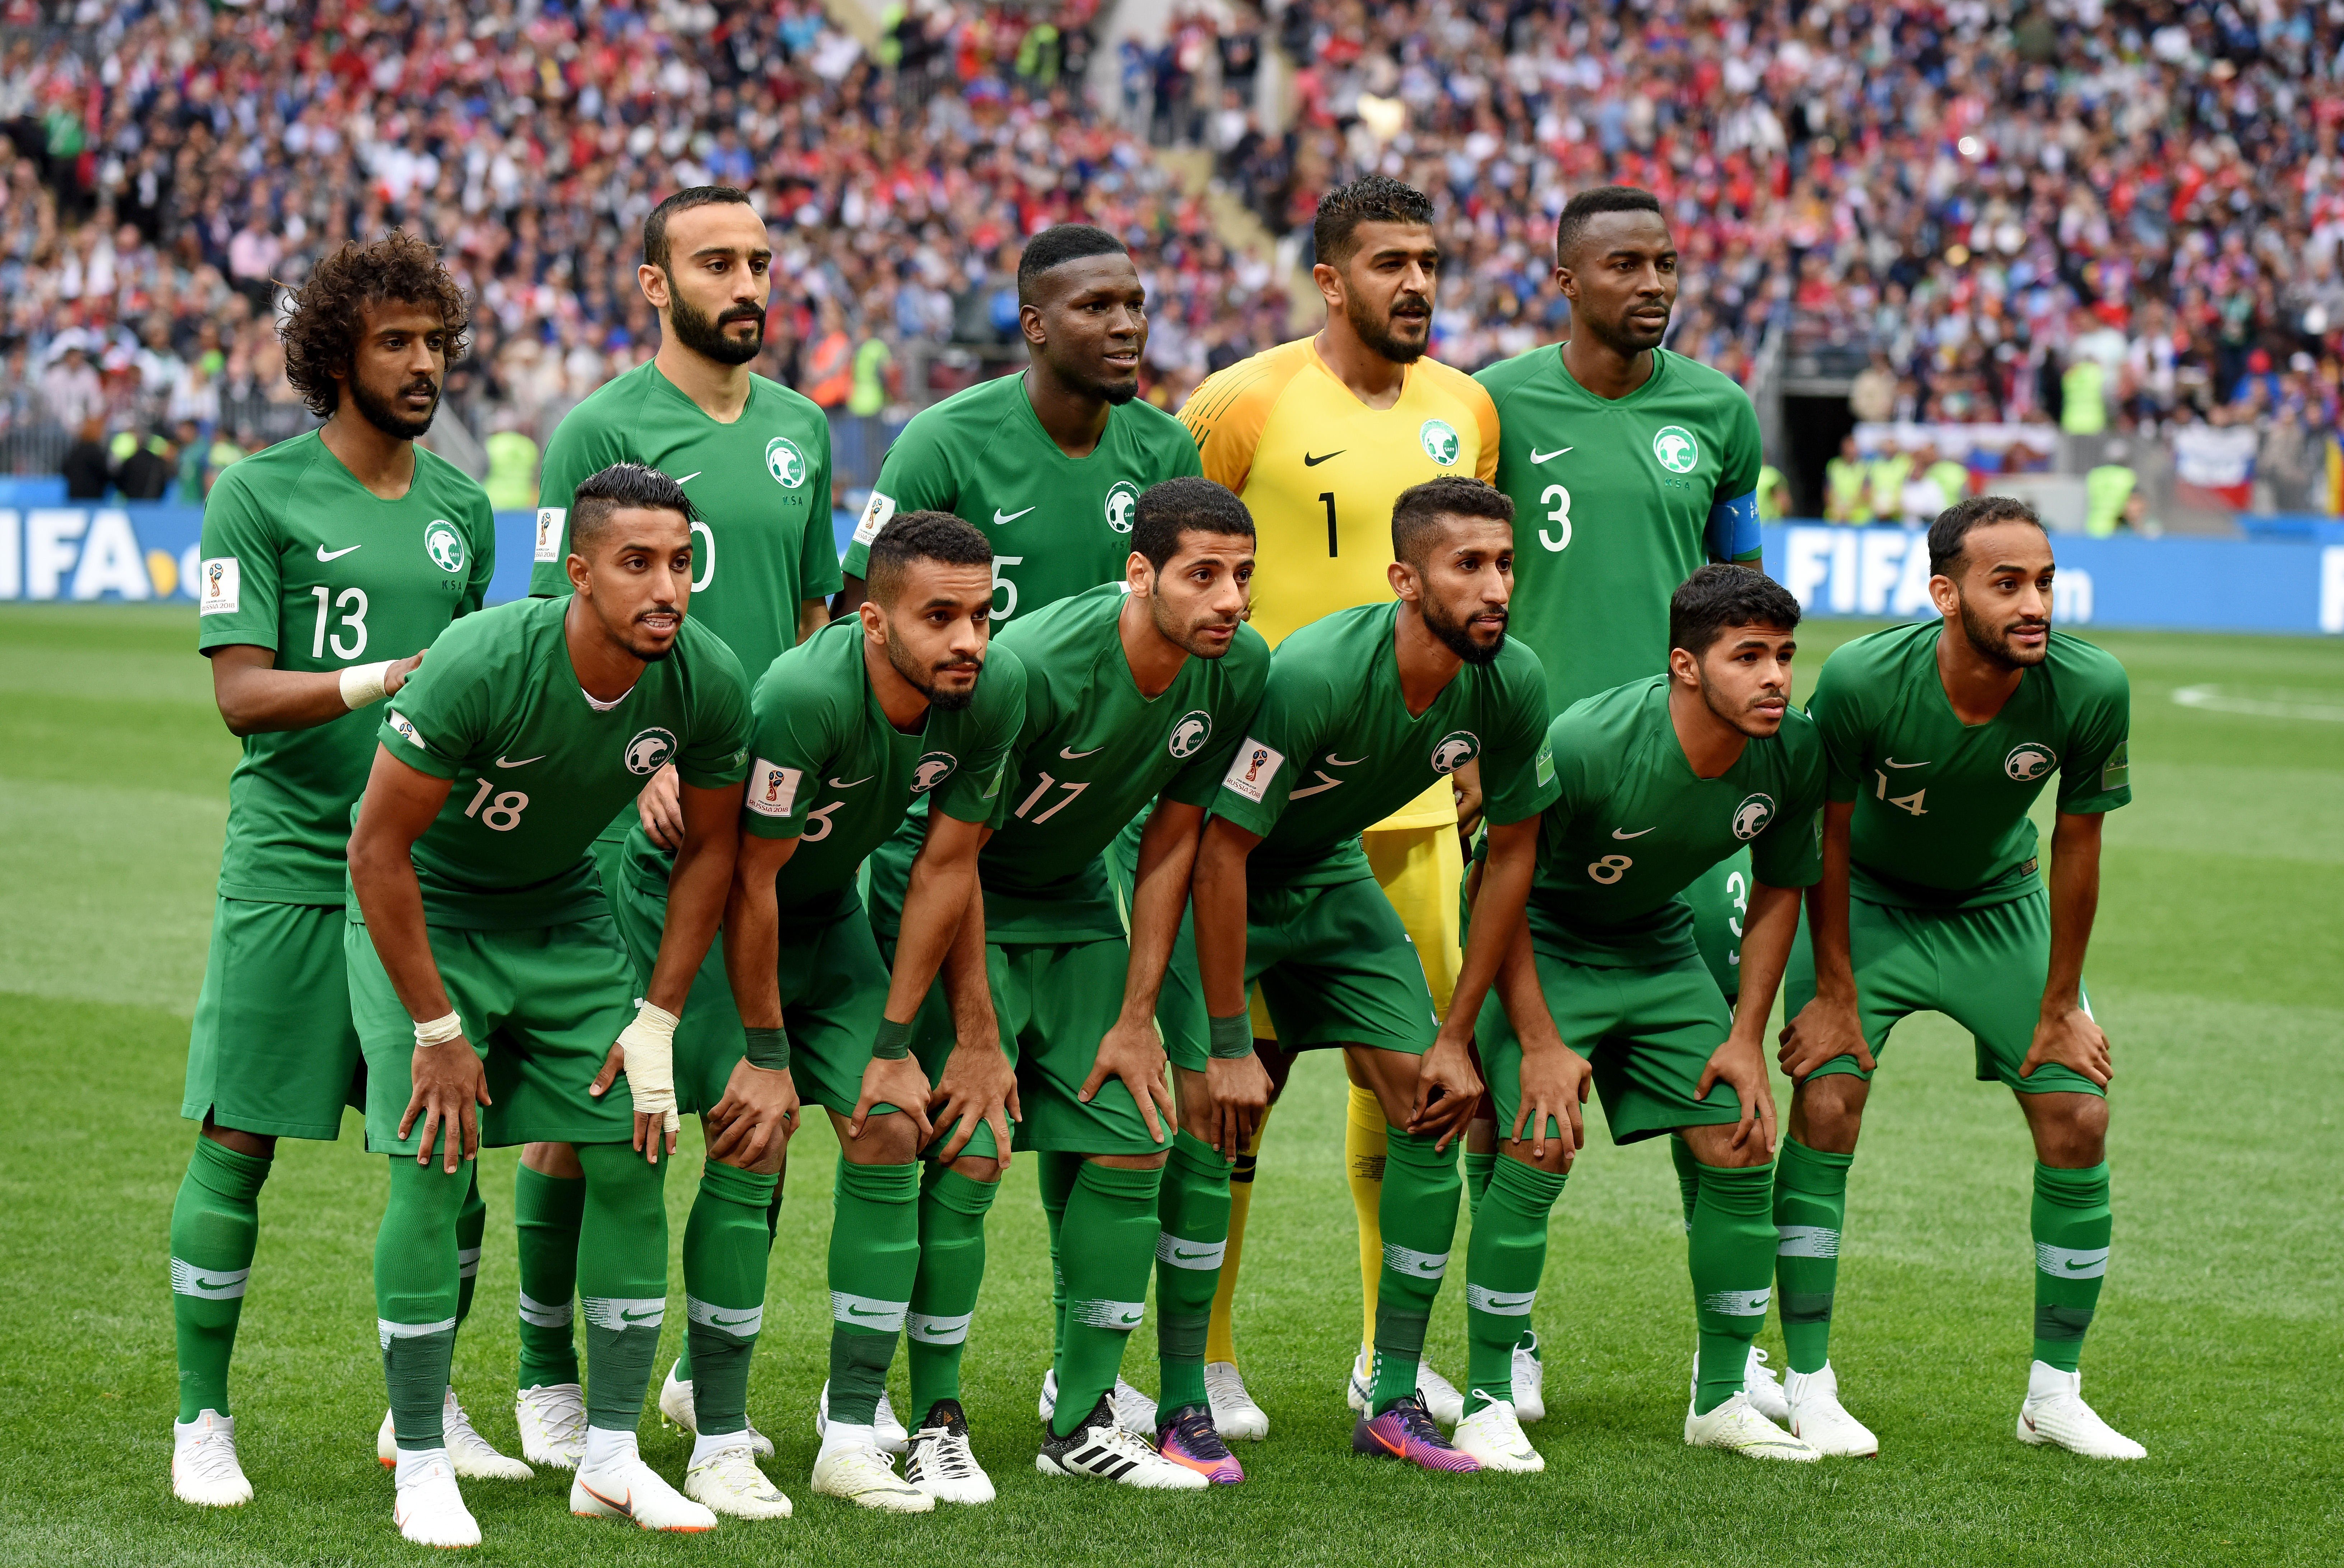 The Saudi Arabia national team will be expected to trounce Qatar at the Asian Cup in UAE, but there is more on the line. Photo: Alamy